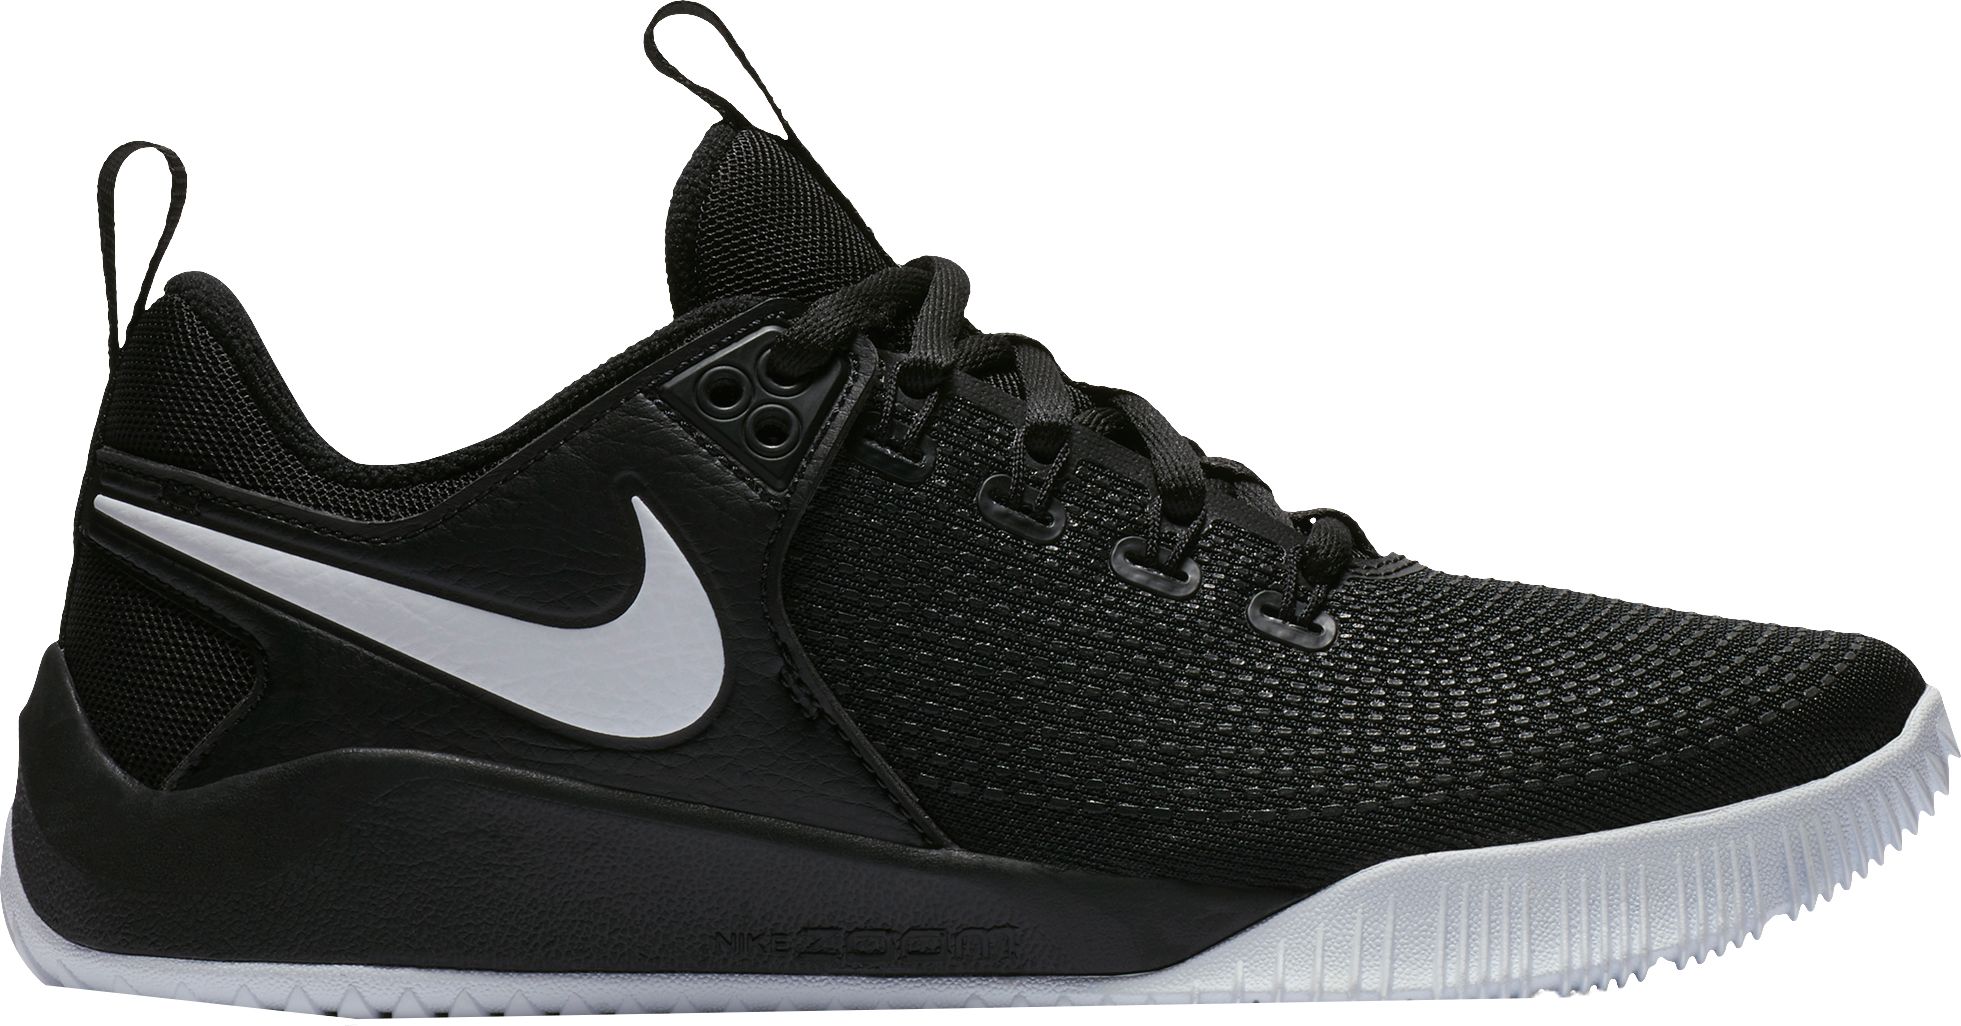 Nike Women's Zoom HyperAce 2 Volleyball Shoes - image 1 of 5